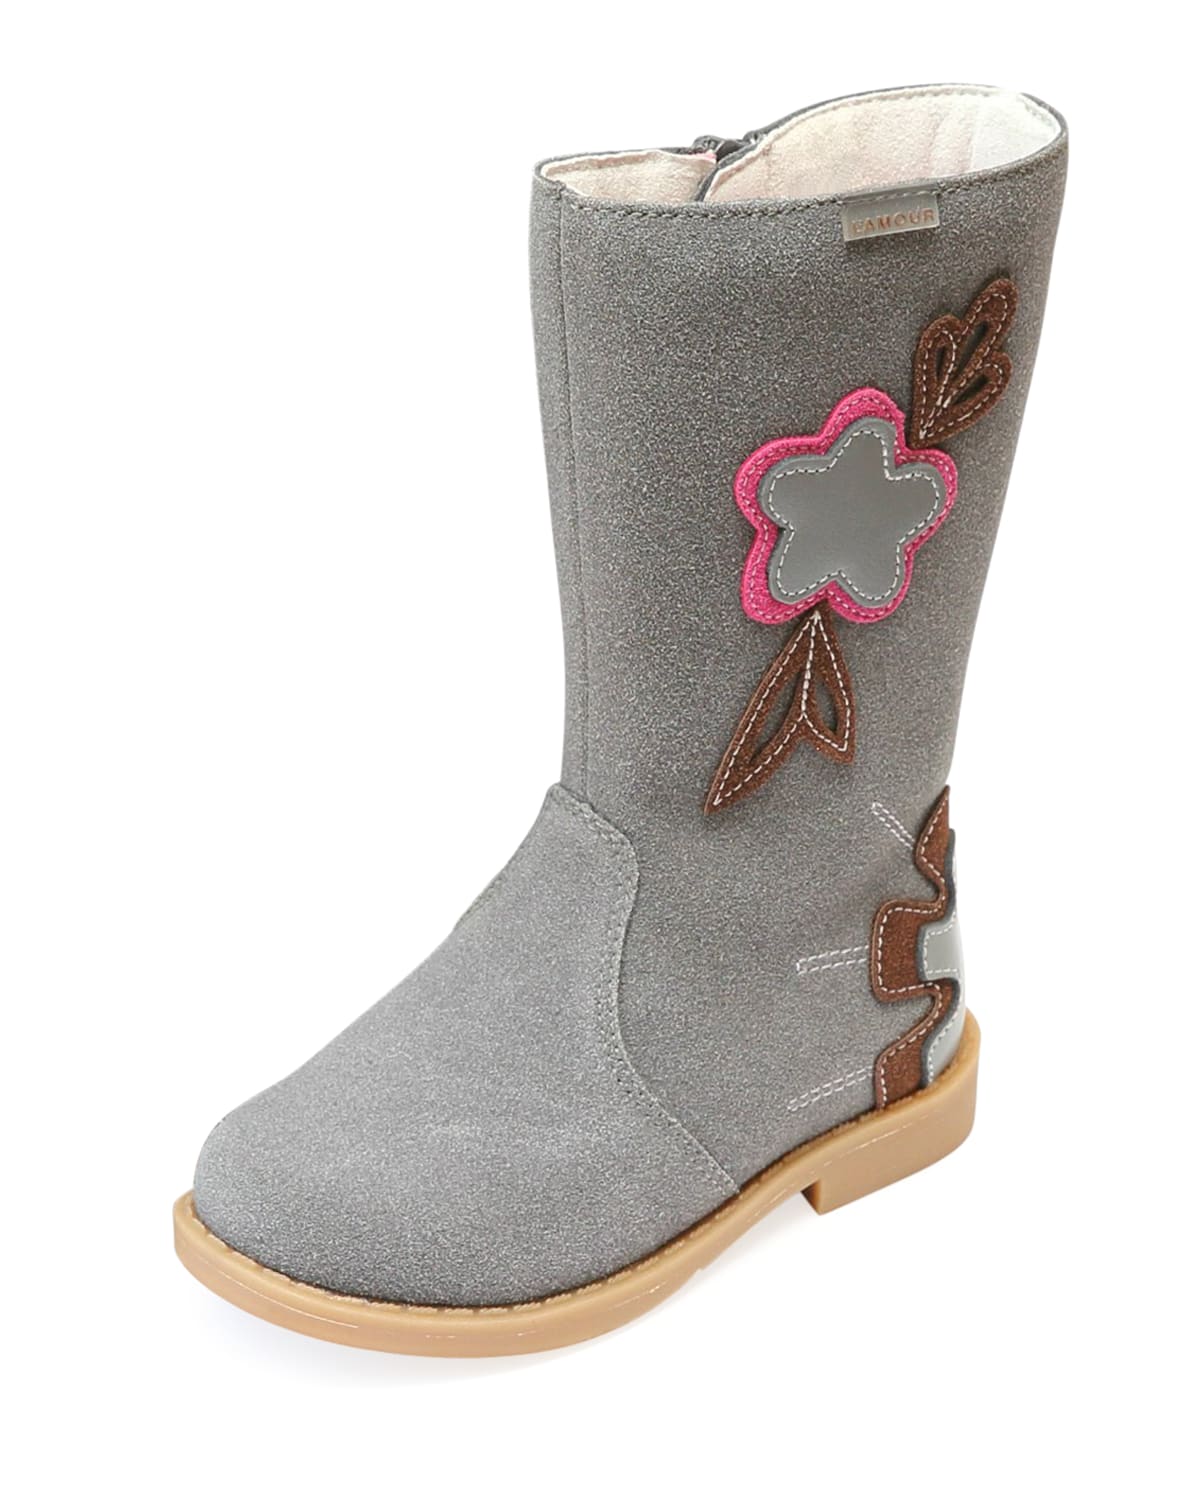 L'amour Shoes Fiore Tall Fashion Boot W/ Stitch Flowers, Baby/toddler/kids In Grey